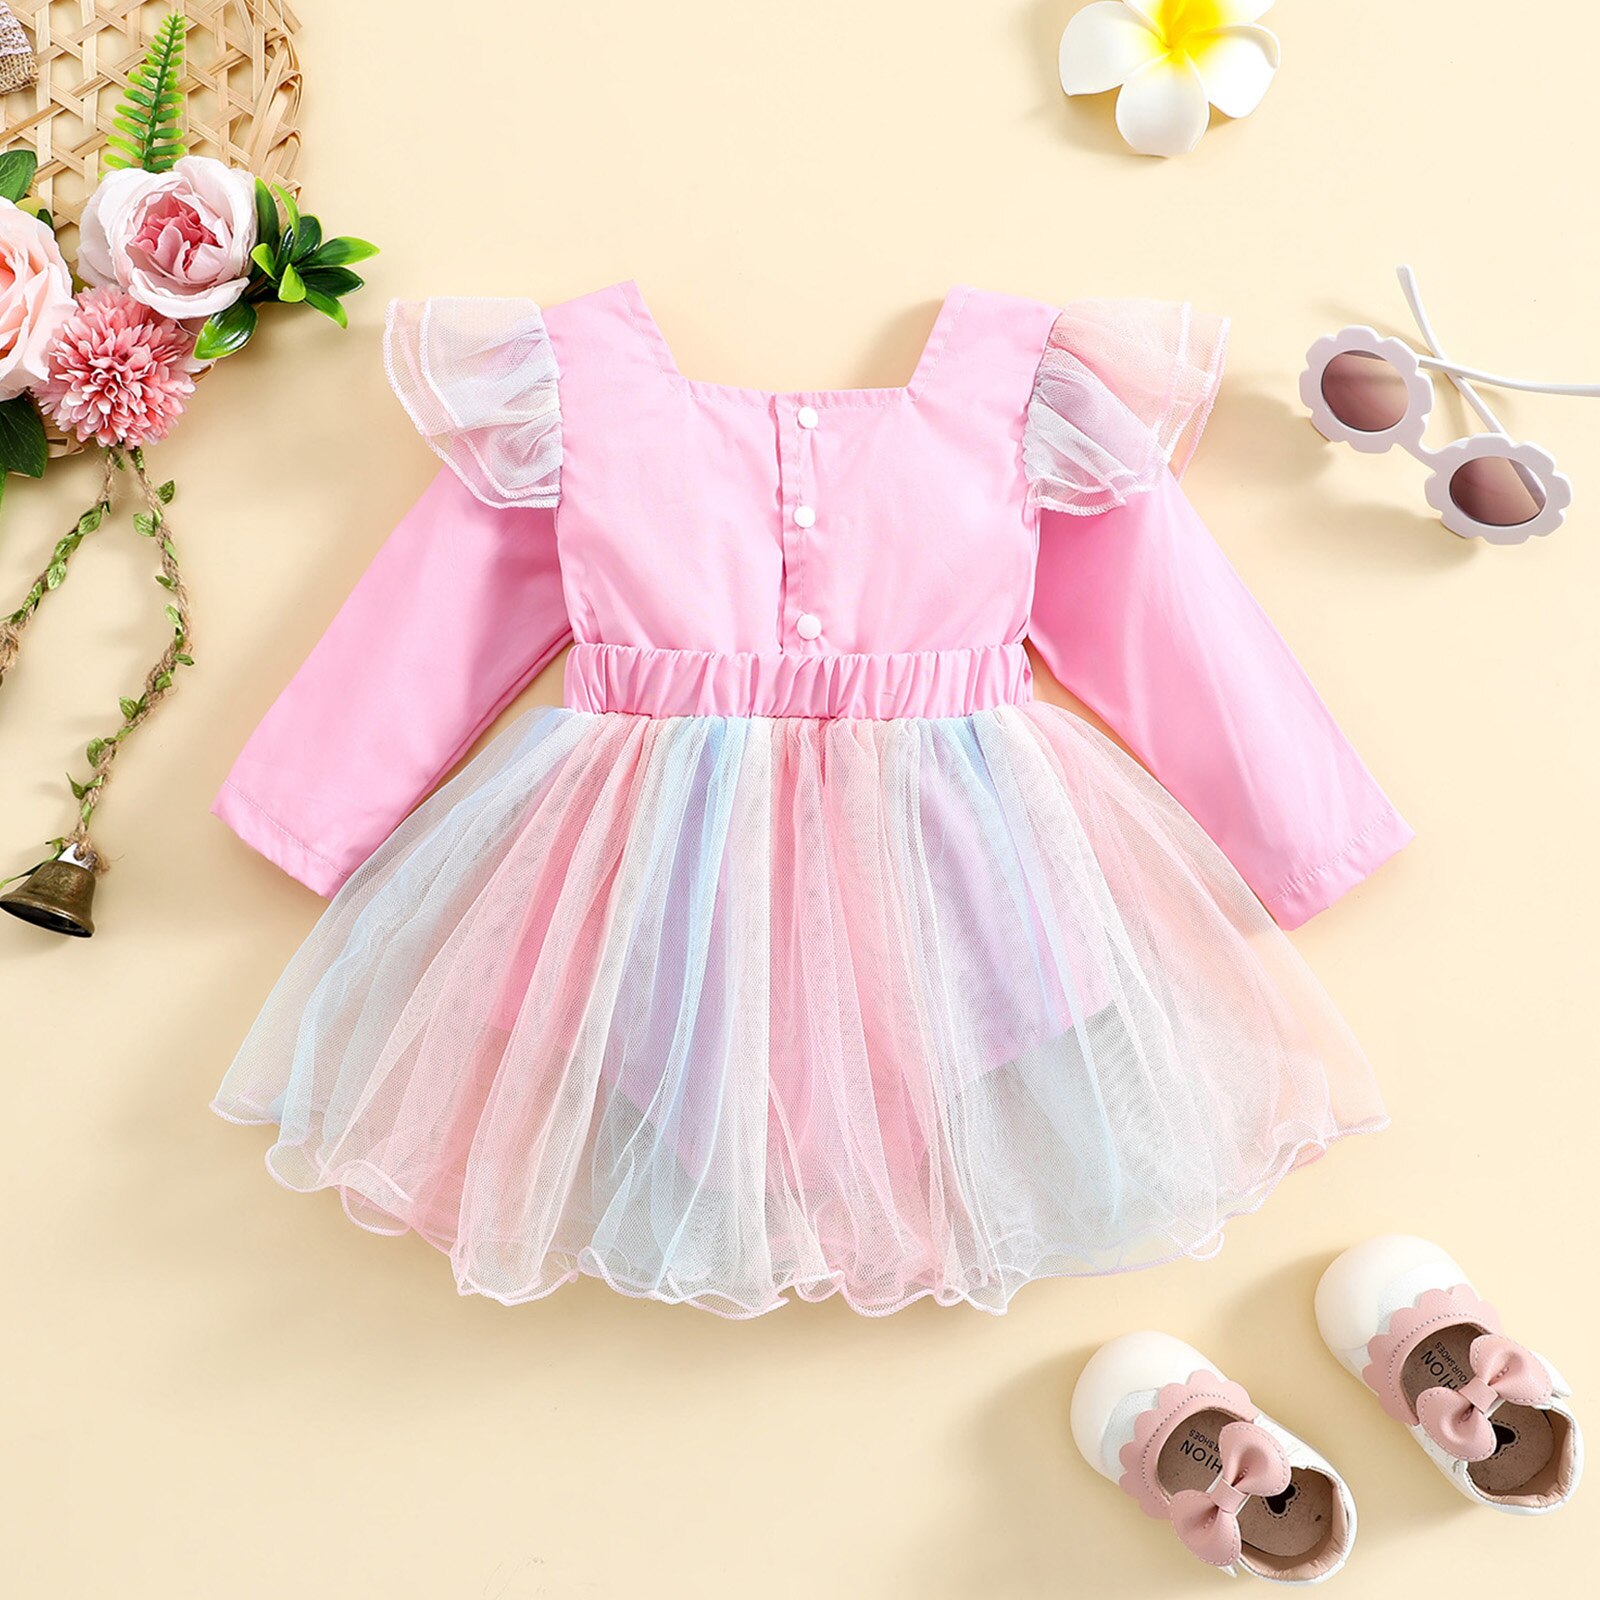 Citgeett-Autumn-Infant-Baby-Girls-Bodysuit-Long-Sleeve-Bowknot-Tulle-Patchwork-Dress-Daily-Party-Clothes-1